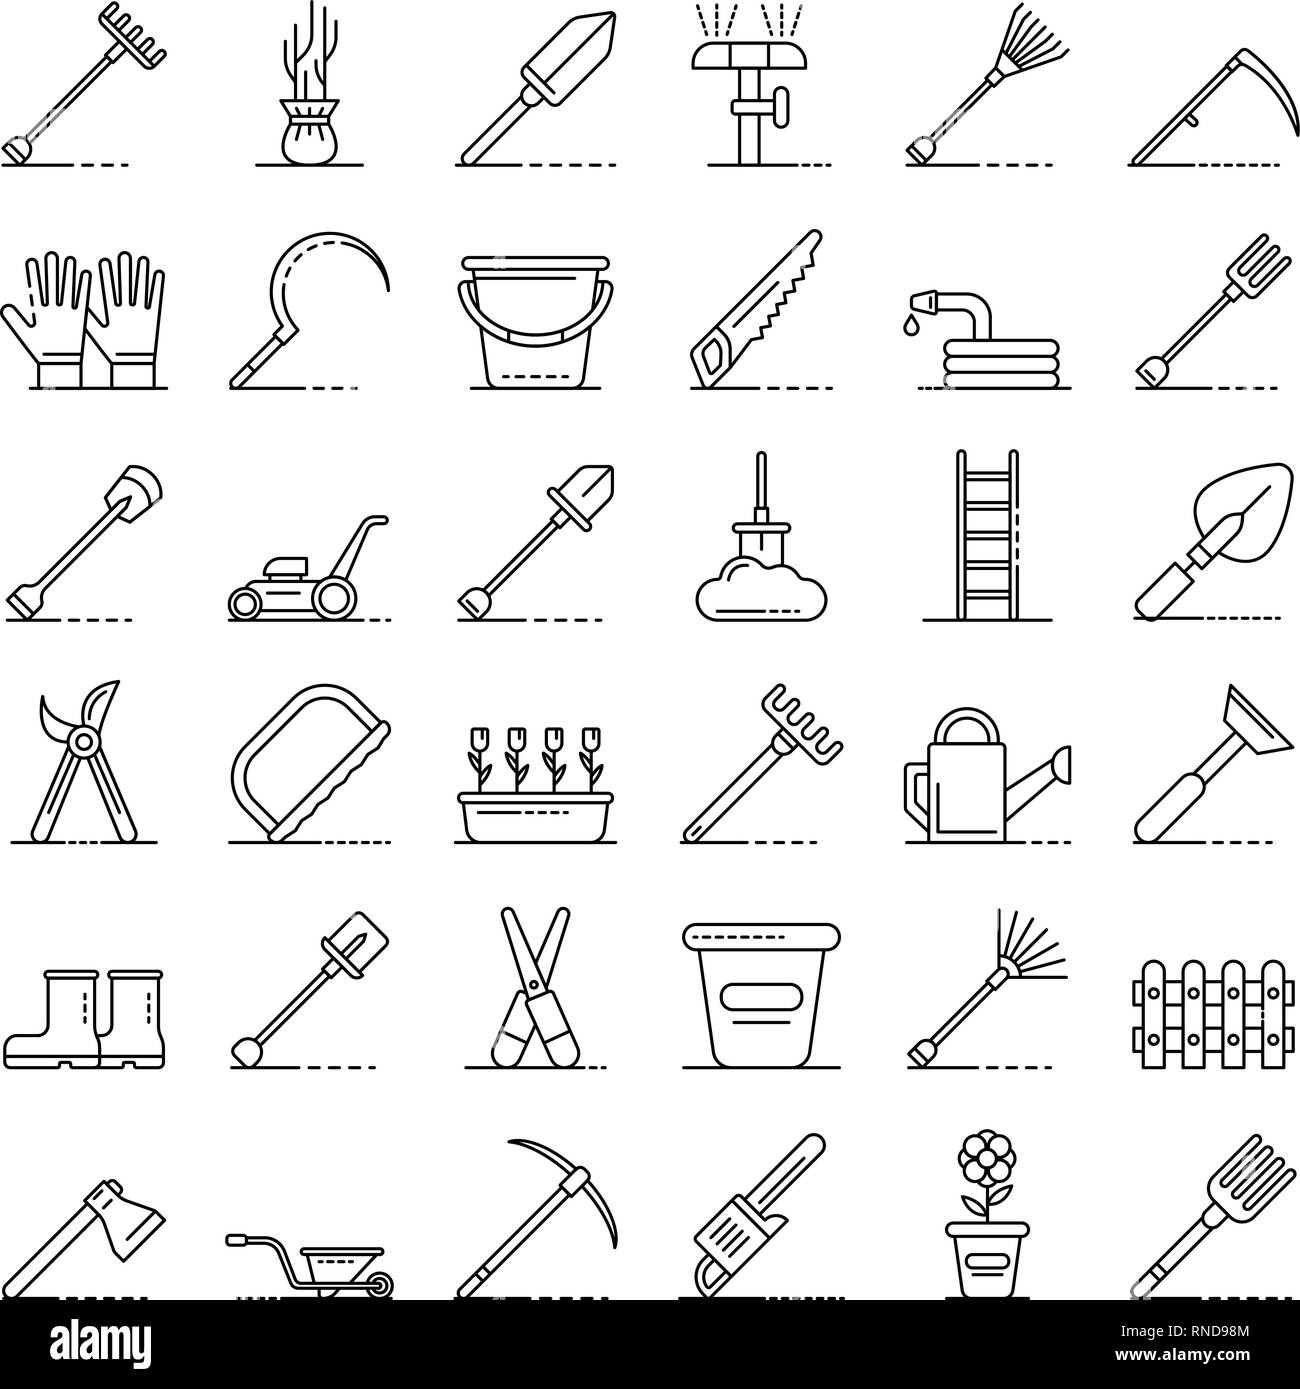 Farming Tools Black And White Stock Photos Images Alamy